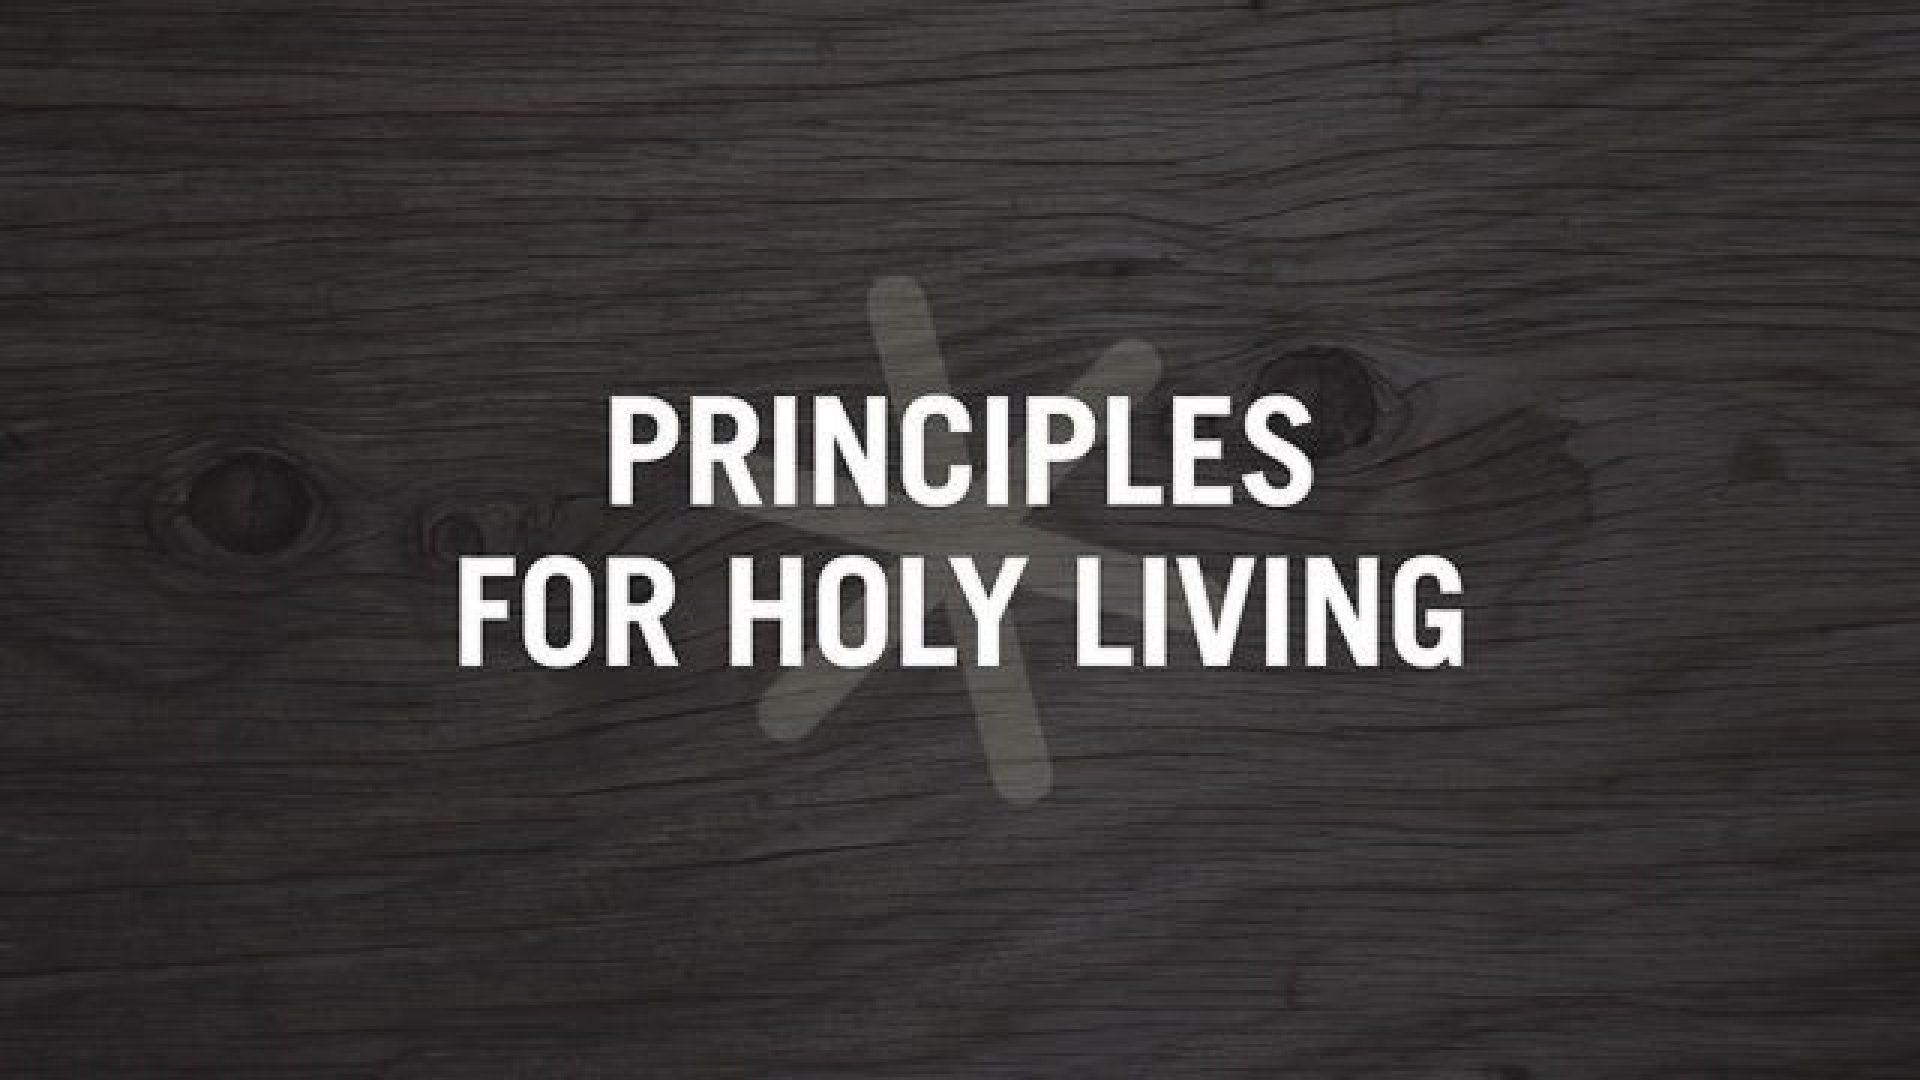 PRINCIPLES FOR HOLY LIVING